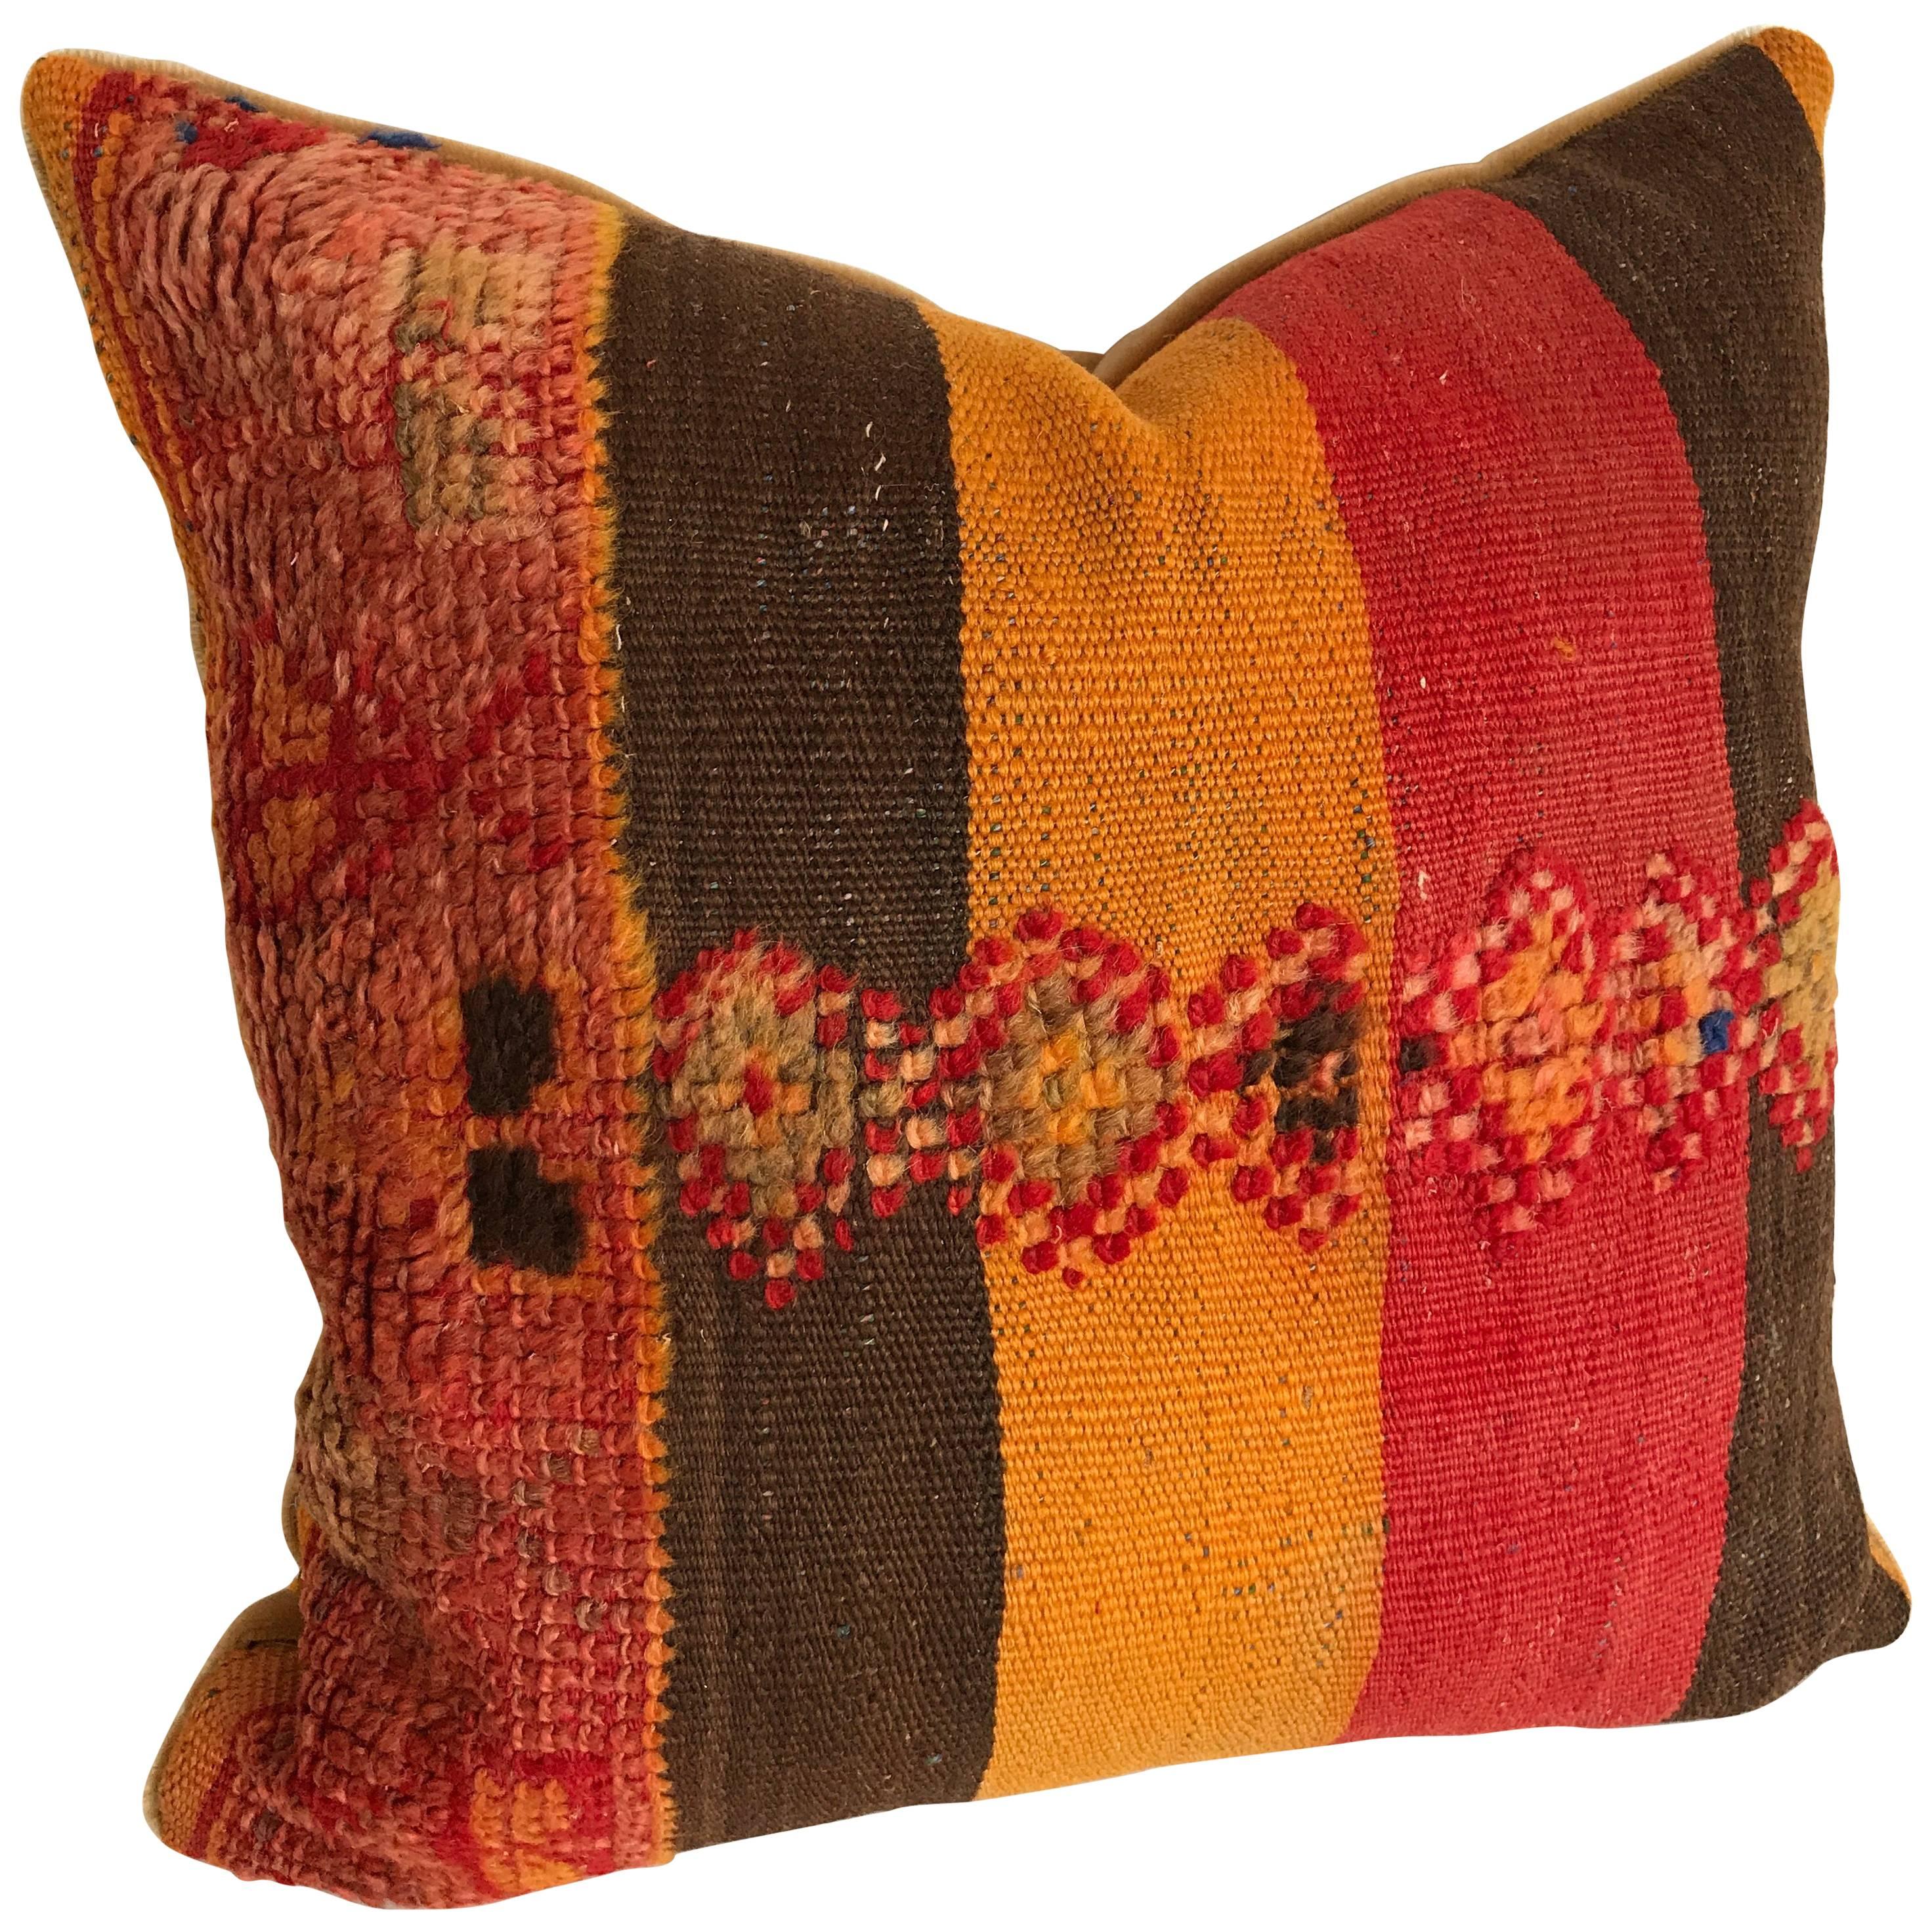 Custom Moroccan Pillow Cut from a Hand Loomed Wool Vintage Berber Rug